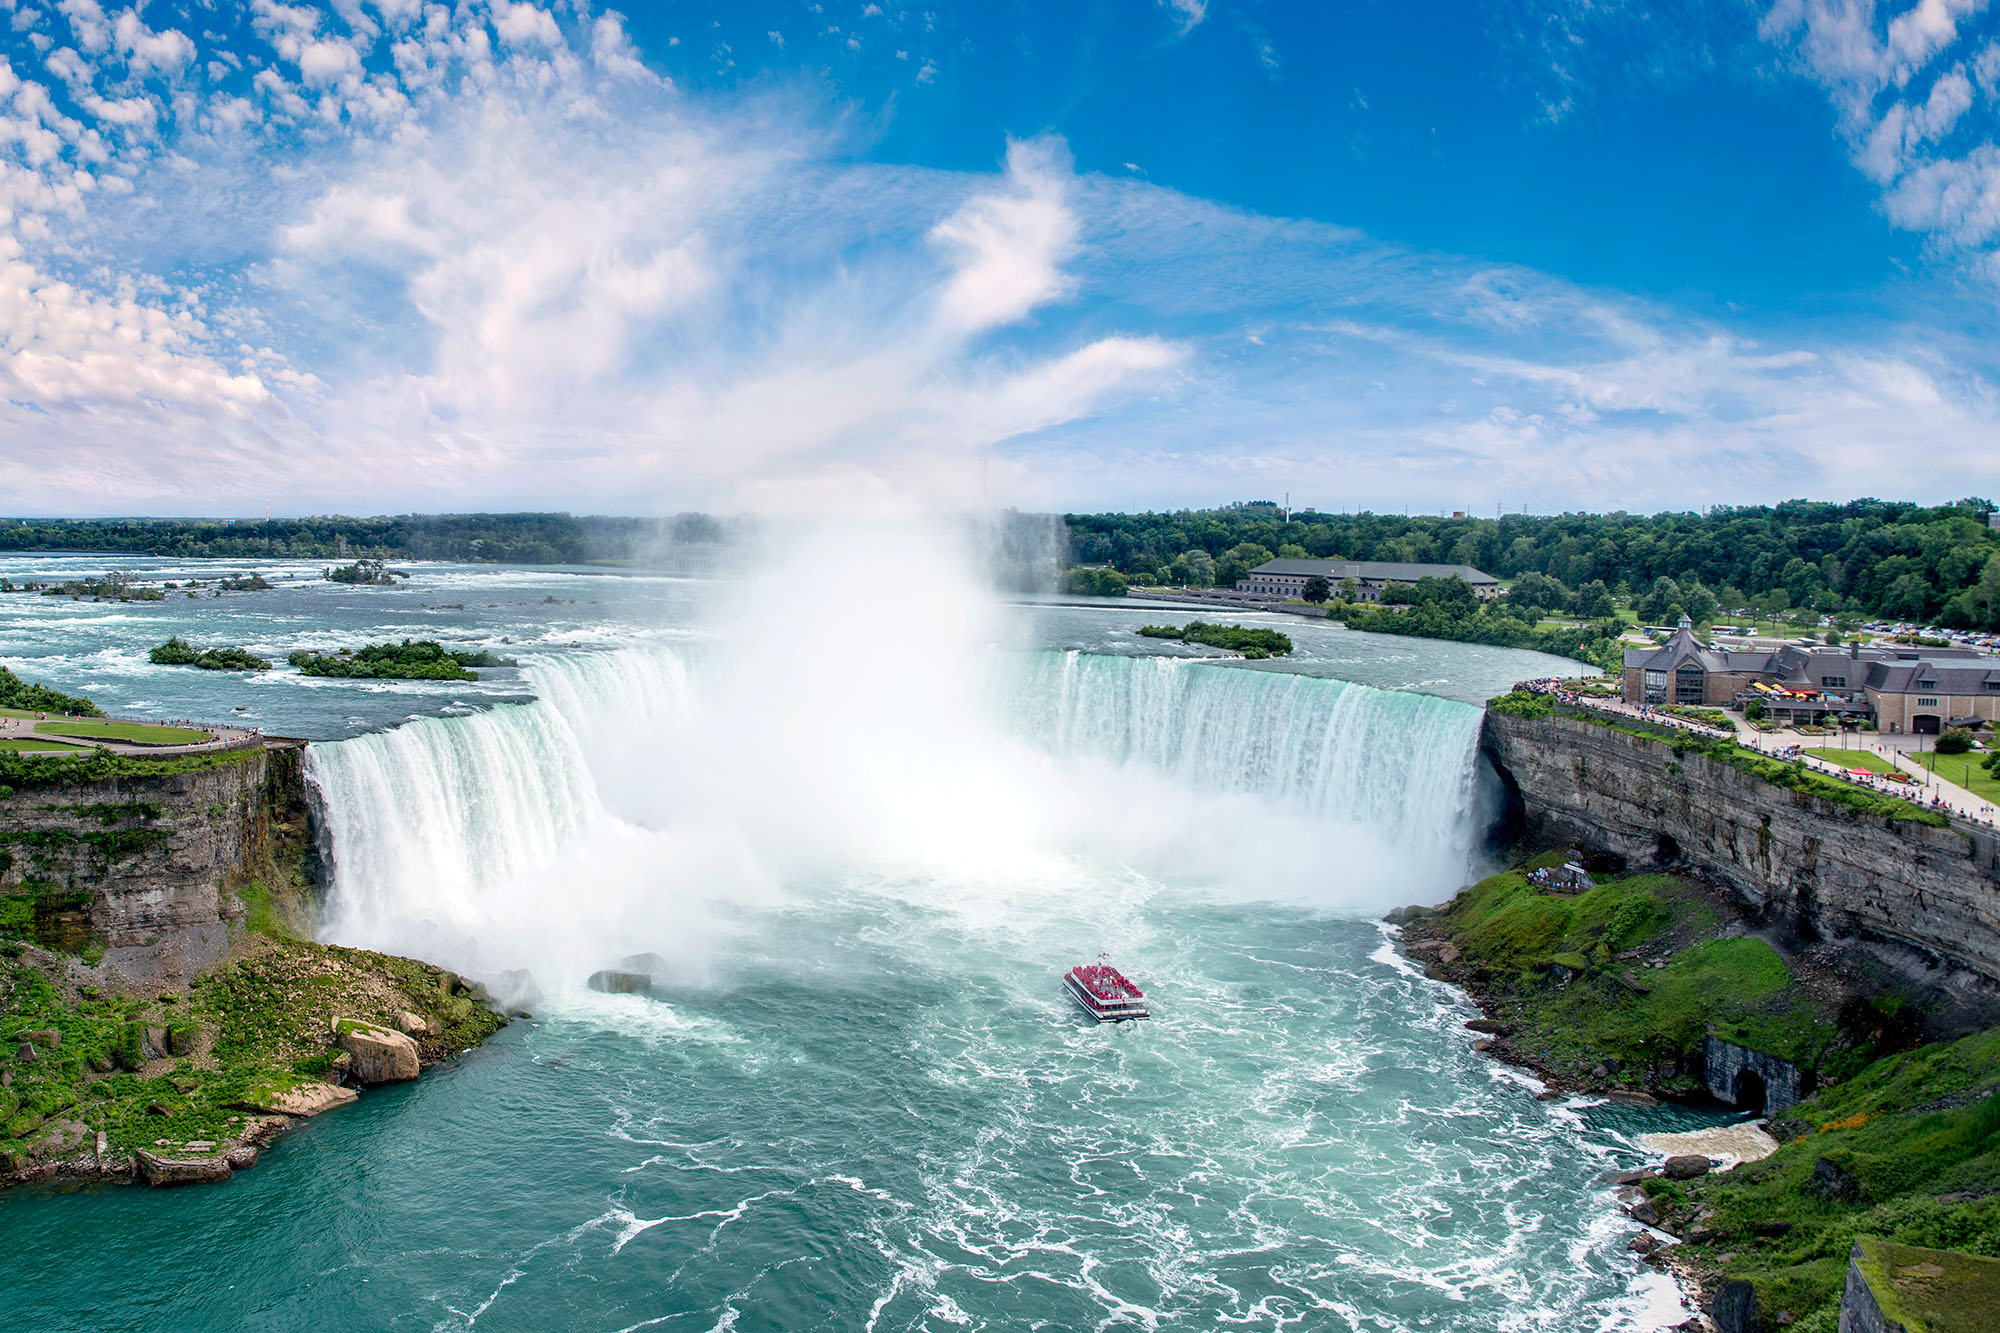 As one of the worlds most iconic destinations, Niagara Falls is an ideal setting for the biggest tourism trade show in Canada from May 26-29. Photo: Chris Futcher. (CNW Group/Canadian Tourism Commission)